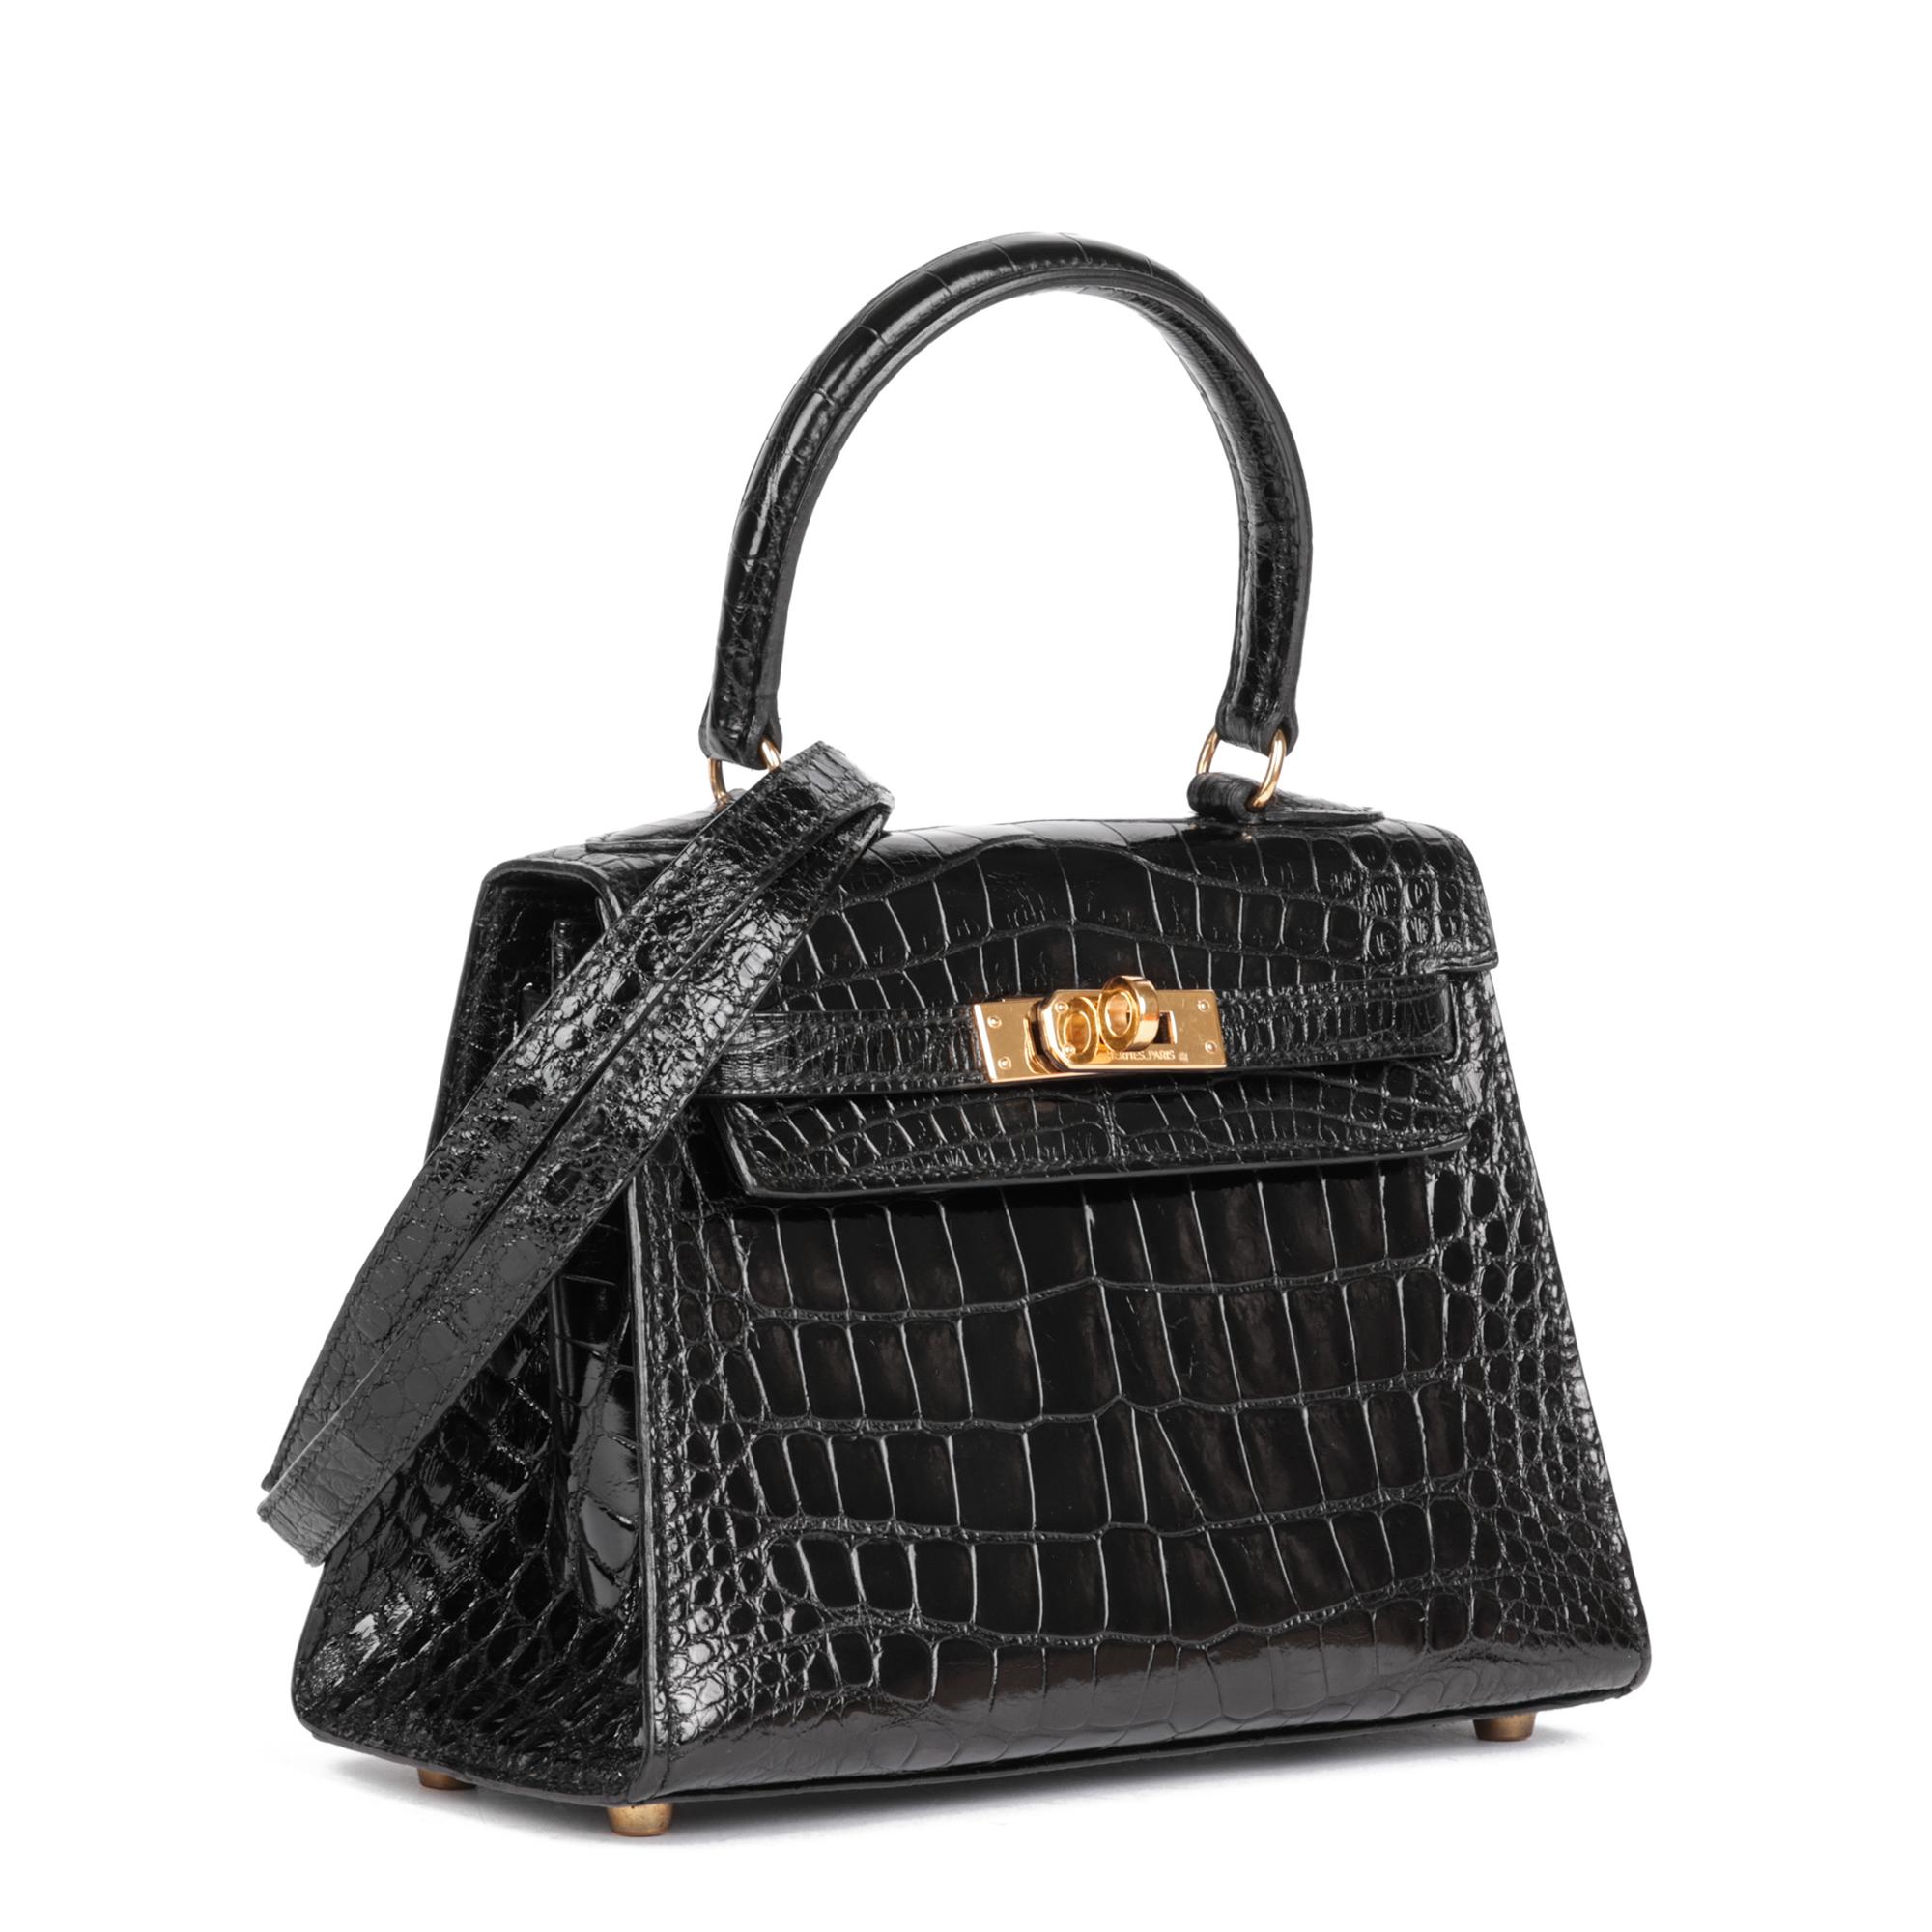 Hermès Black Shiny Mississippiensis Alligator Leather Vintage Kelly 20cm Sellier

CONDITION NOTES
The exterior is in very good condition with light signs of use.
The interior is in excellent condition with light signs of use.
The hardware is in